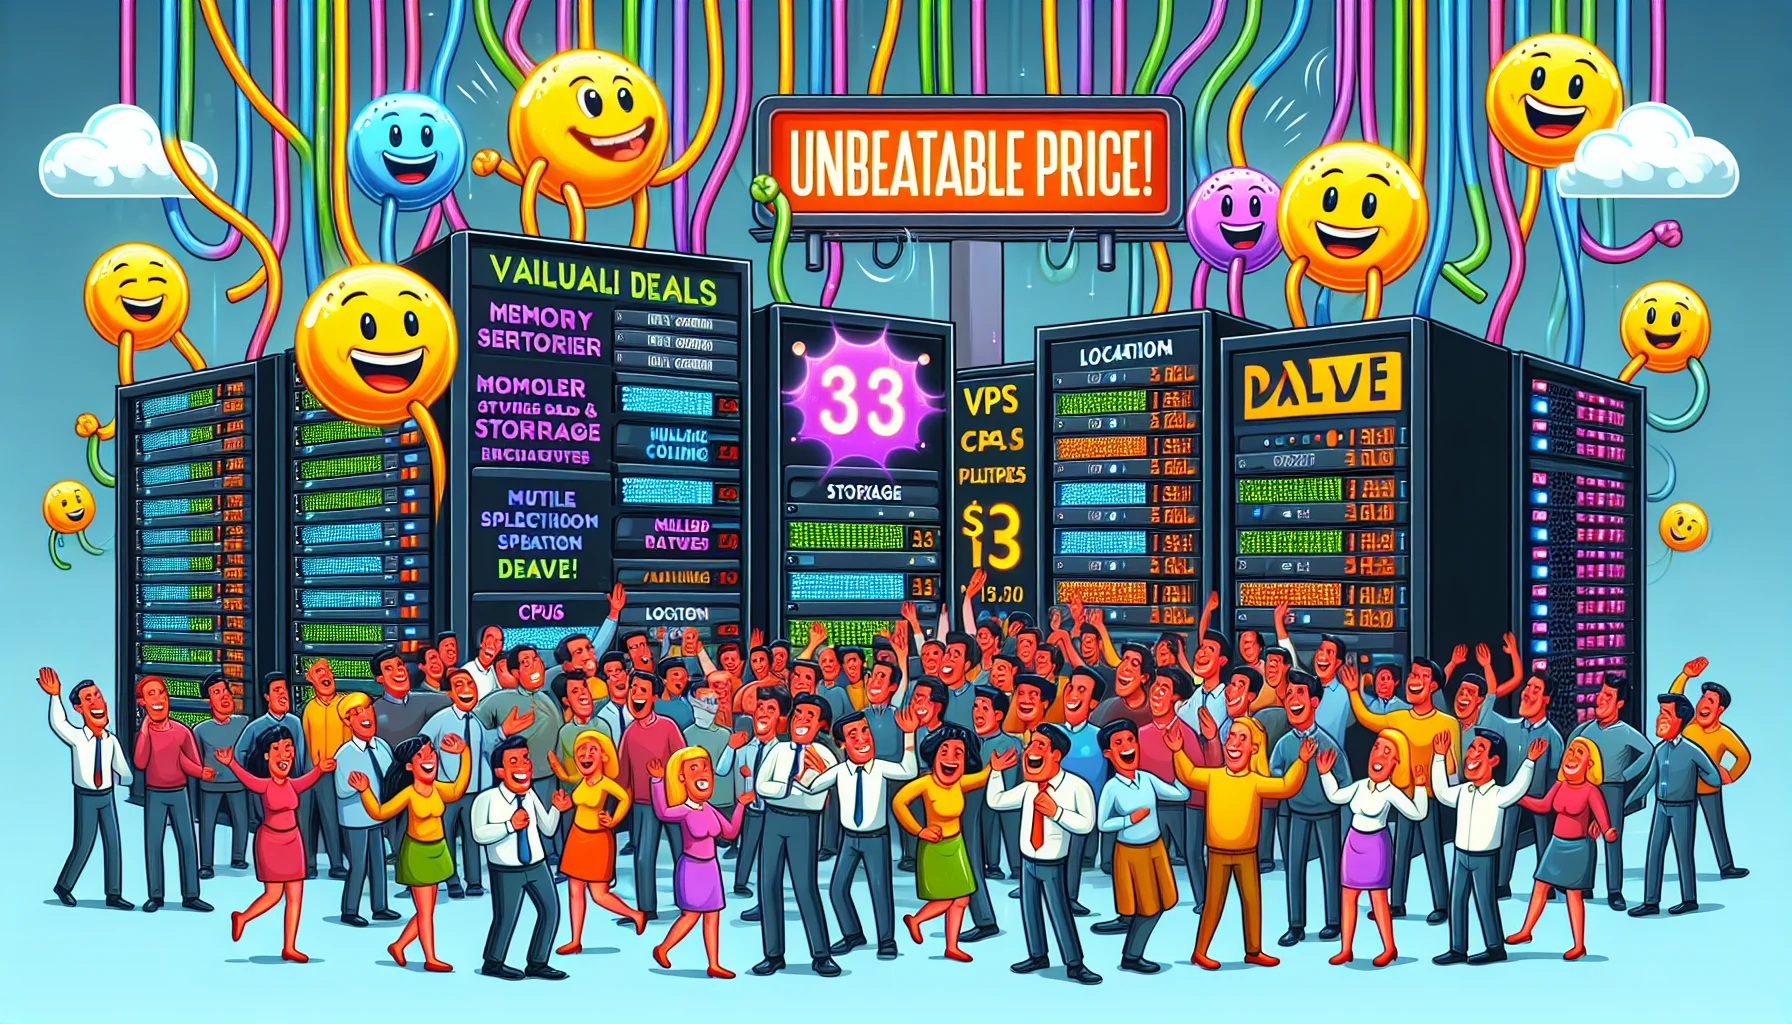 In a playful and amusing scene, depict a group of diverse, joyous people excitedly exploring value deals and packages of a hypothetical virtual private server (VPS) hosting service. Include reference to a variety of nominal features: diverse memory and storage tiers, multiple CPUS, and location-specific pricing options. In the background, visualise data centres buzzing with activity, colorful network cables navigating like veins, and servers as cartoonish smiling characters, emitting positive pulsating lights. Place a luminous billboard in the tableau showing 'Unbeatable Price!' translating the enticing web hosting scenario.